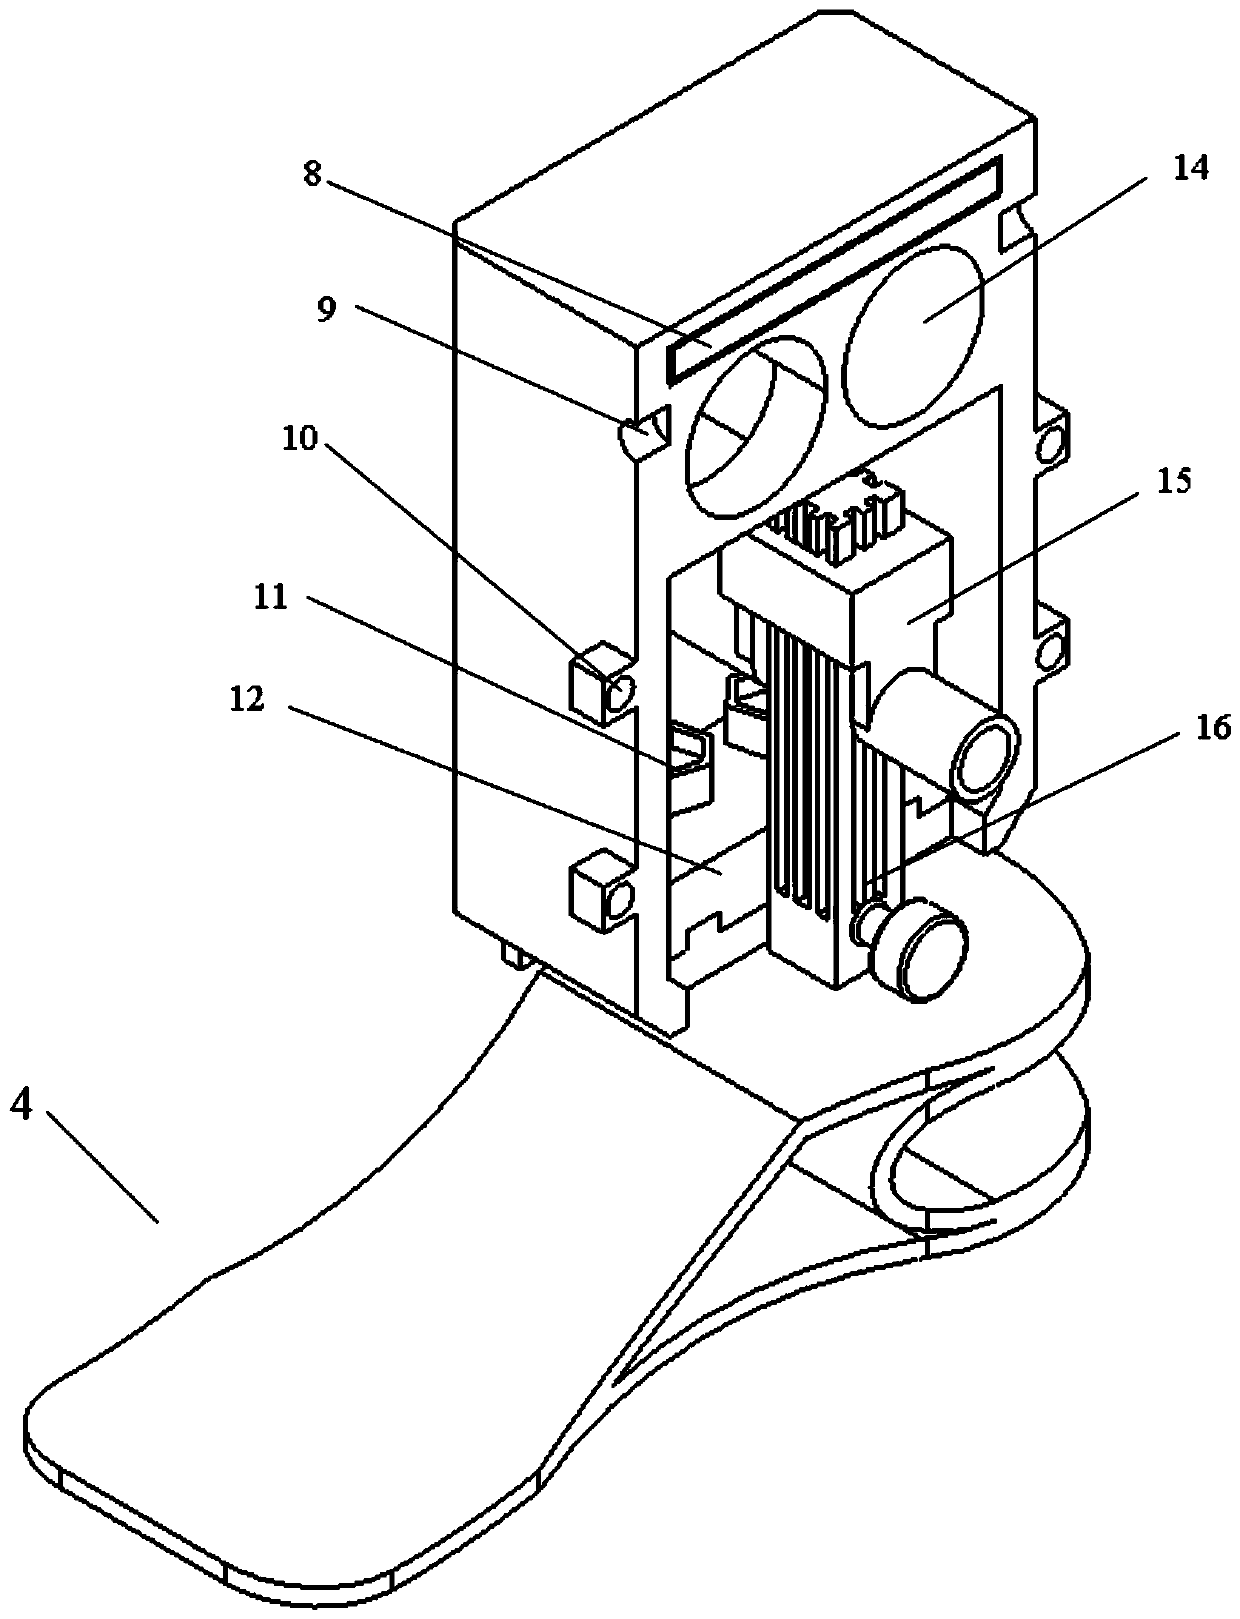 Motor-driven active ankle joint artificial limb and method thereof